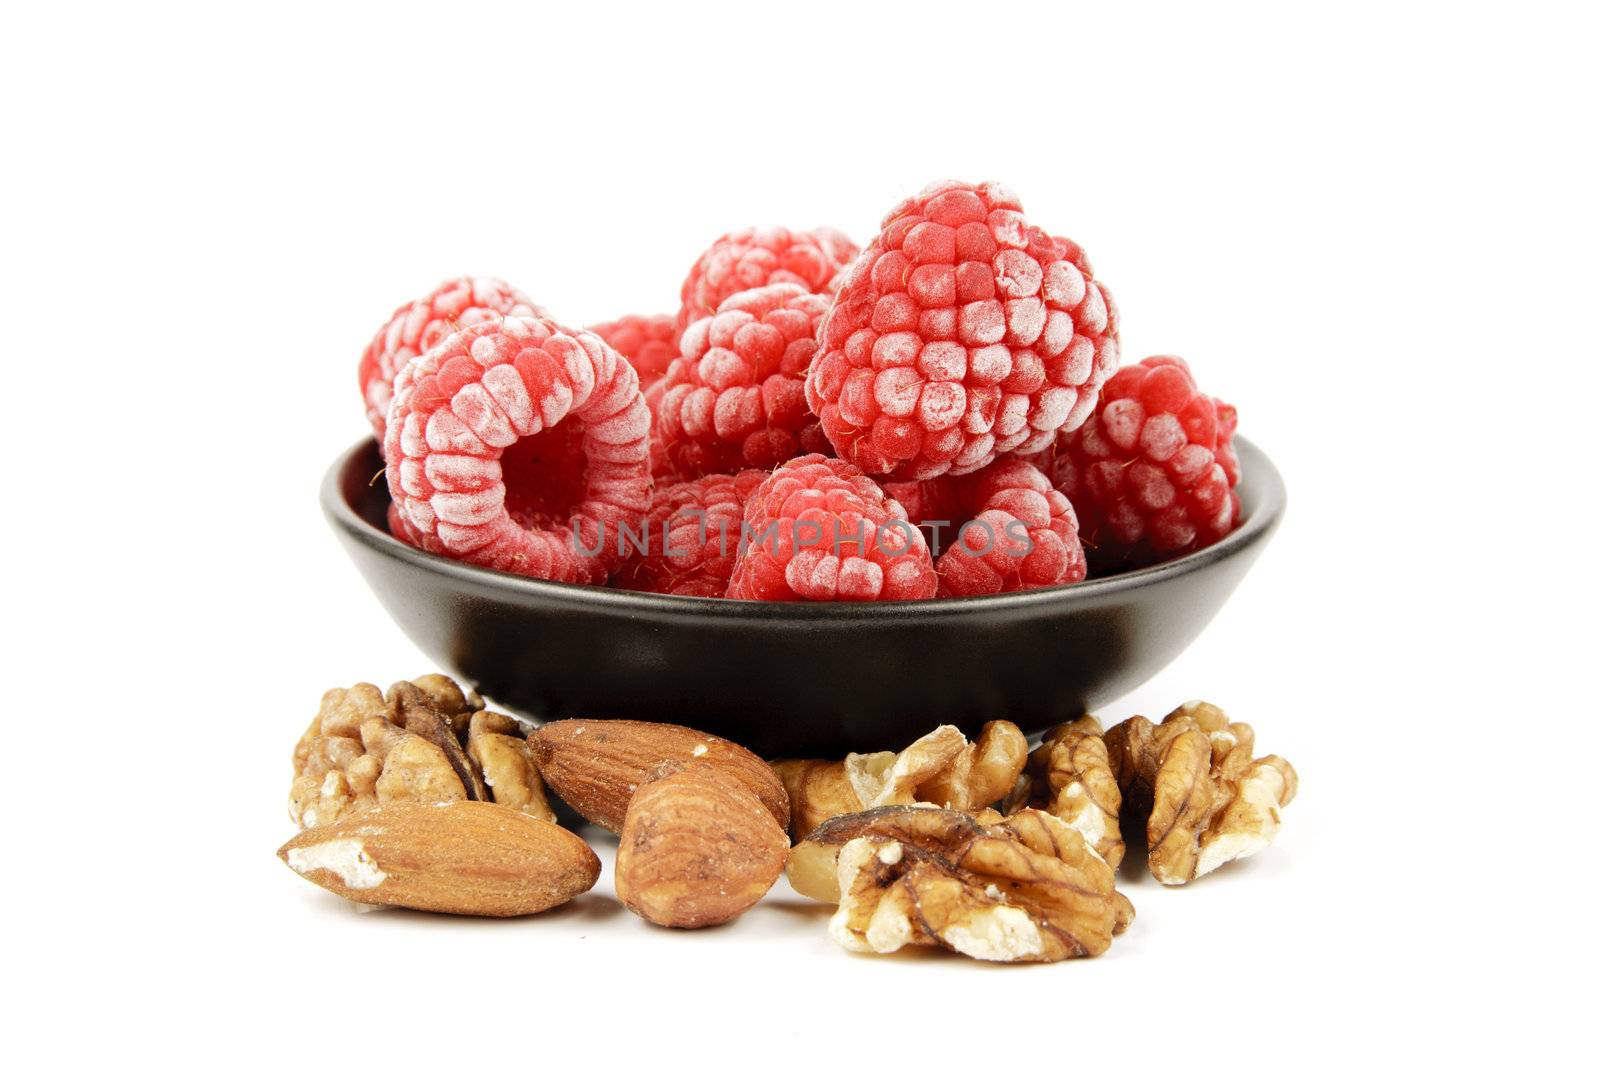 Red ripe frozen raspberries on a reflective white background